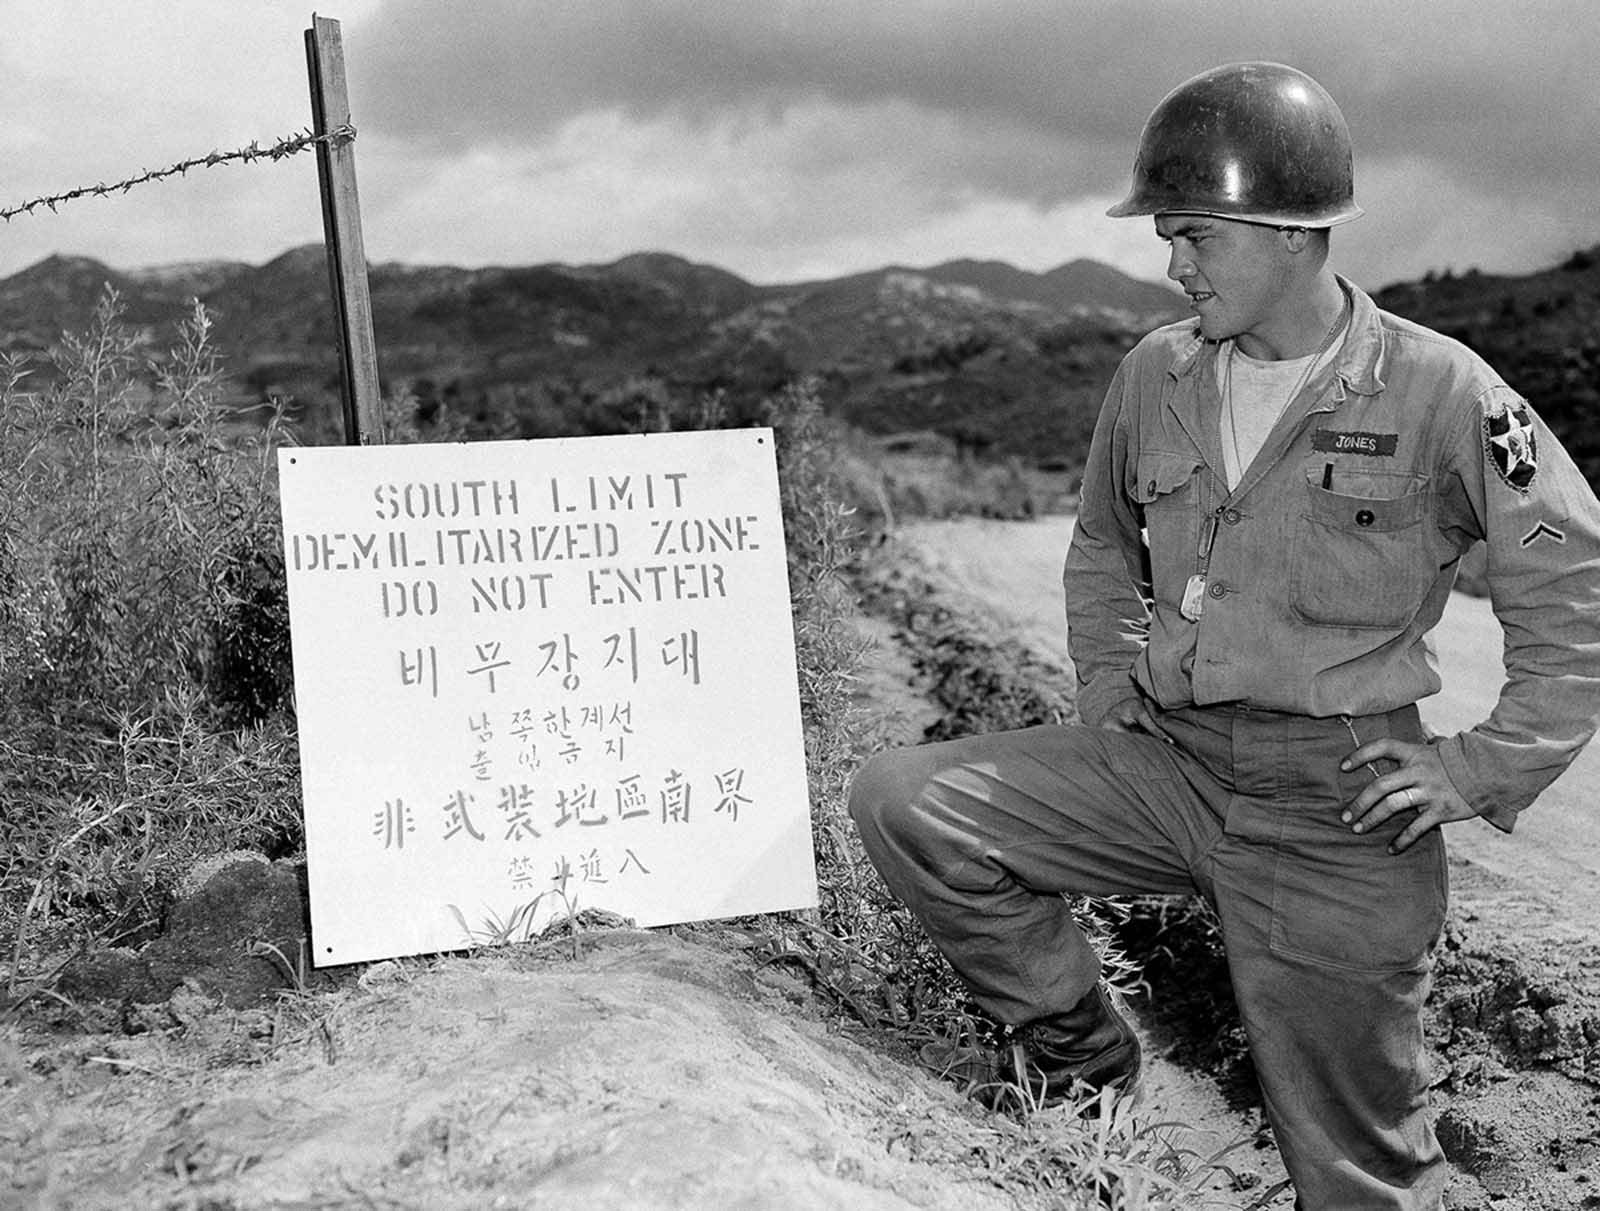 PFC Donald Jones of Topeka, Kansas, pauses to read a sign just posted on the south limit of the demilitarized zone in Korea on July 30, 1953.